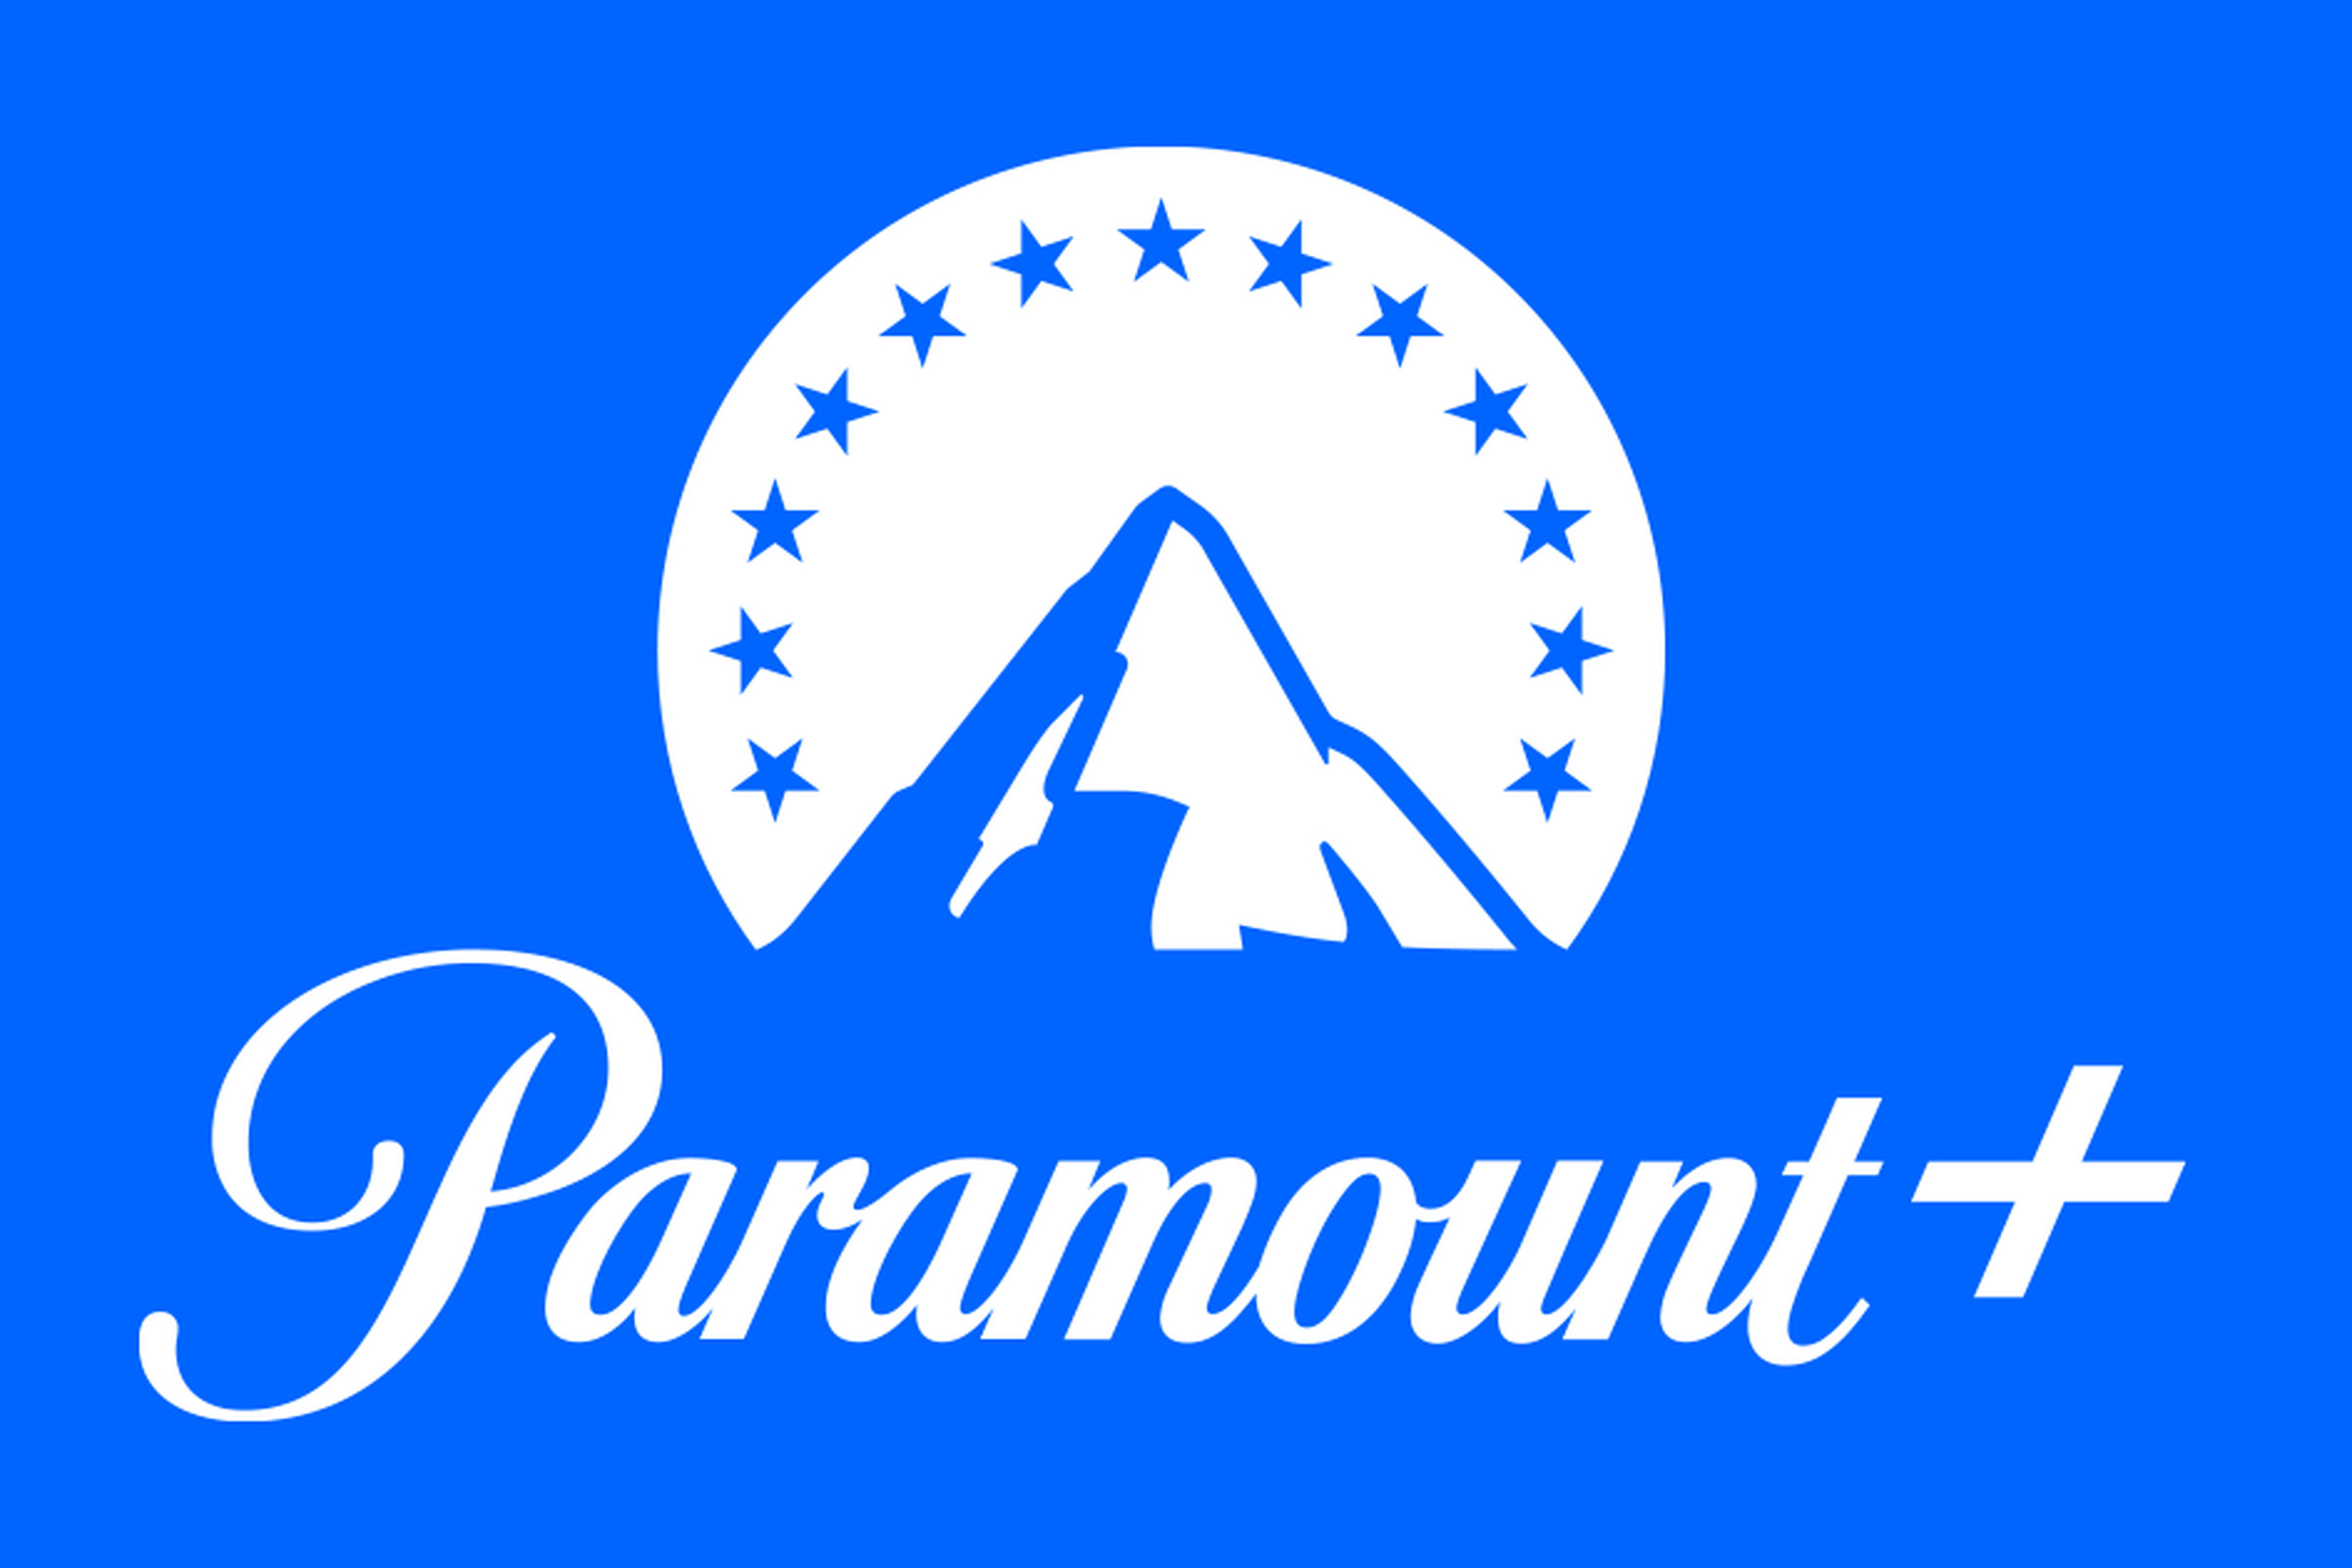 The Paramount Plus logo, which is a blue and white illustration of a mountain peak surrounded by a semi-circle of stars.